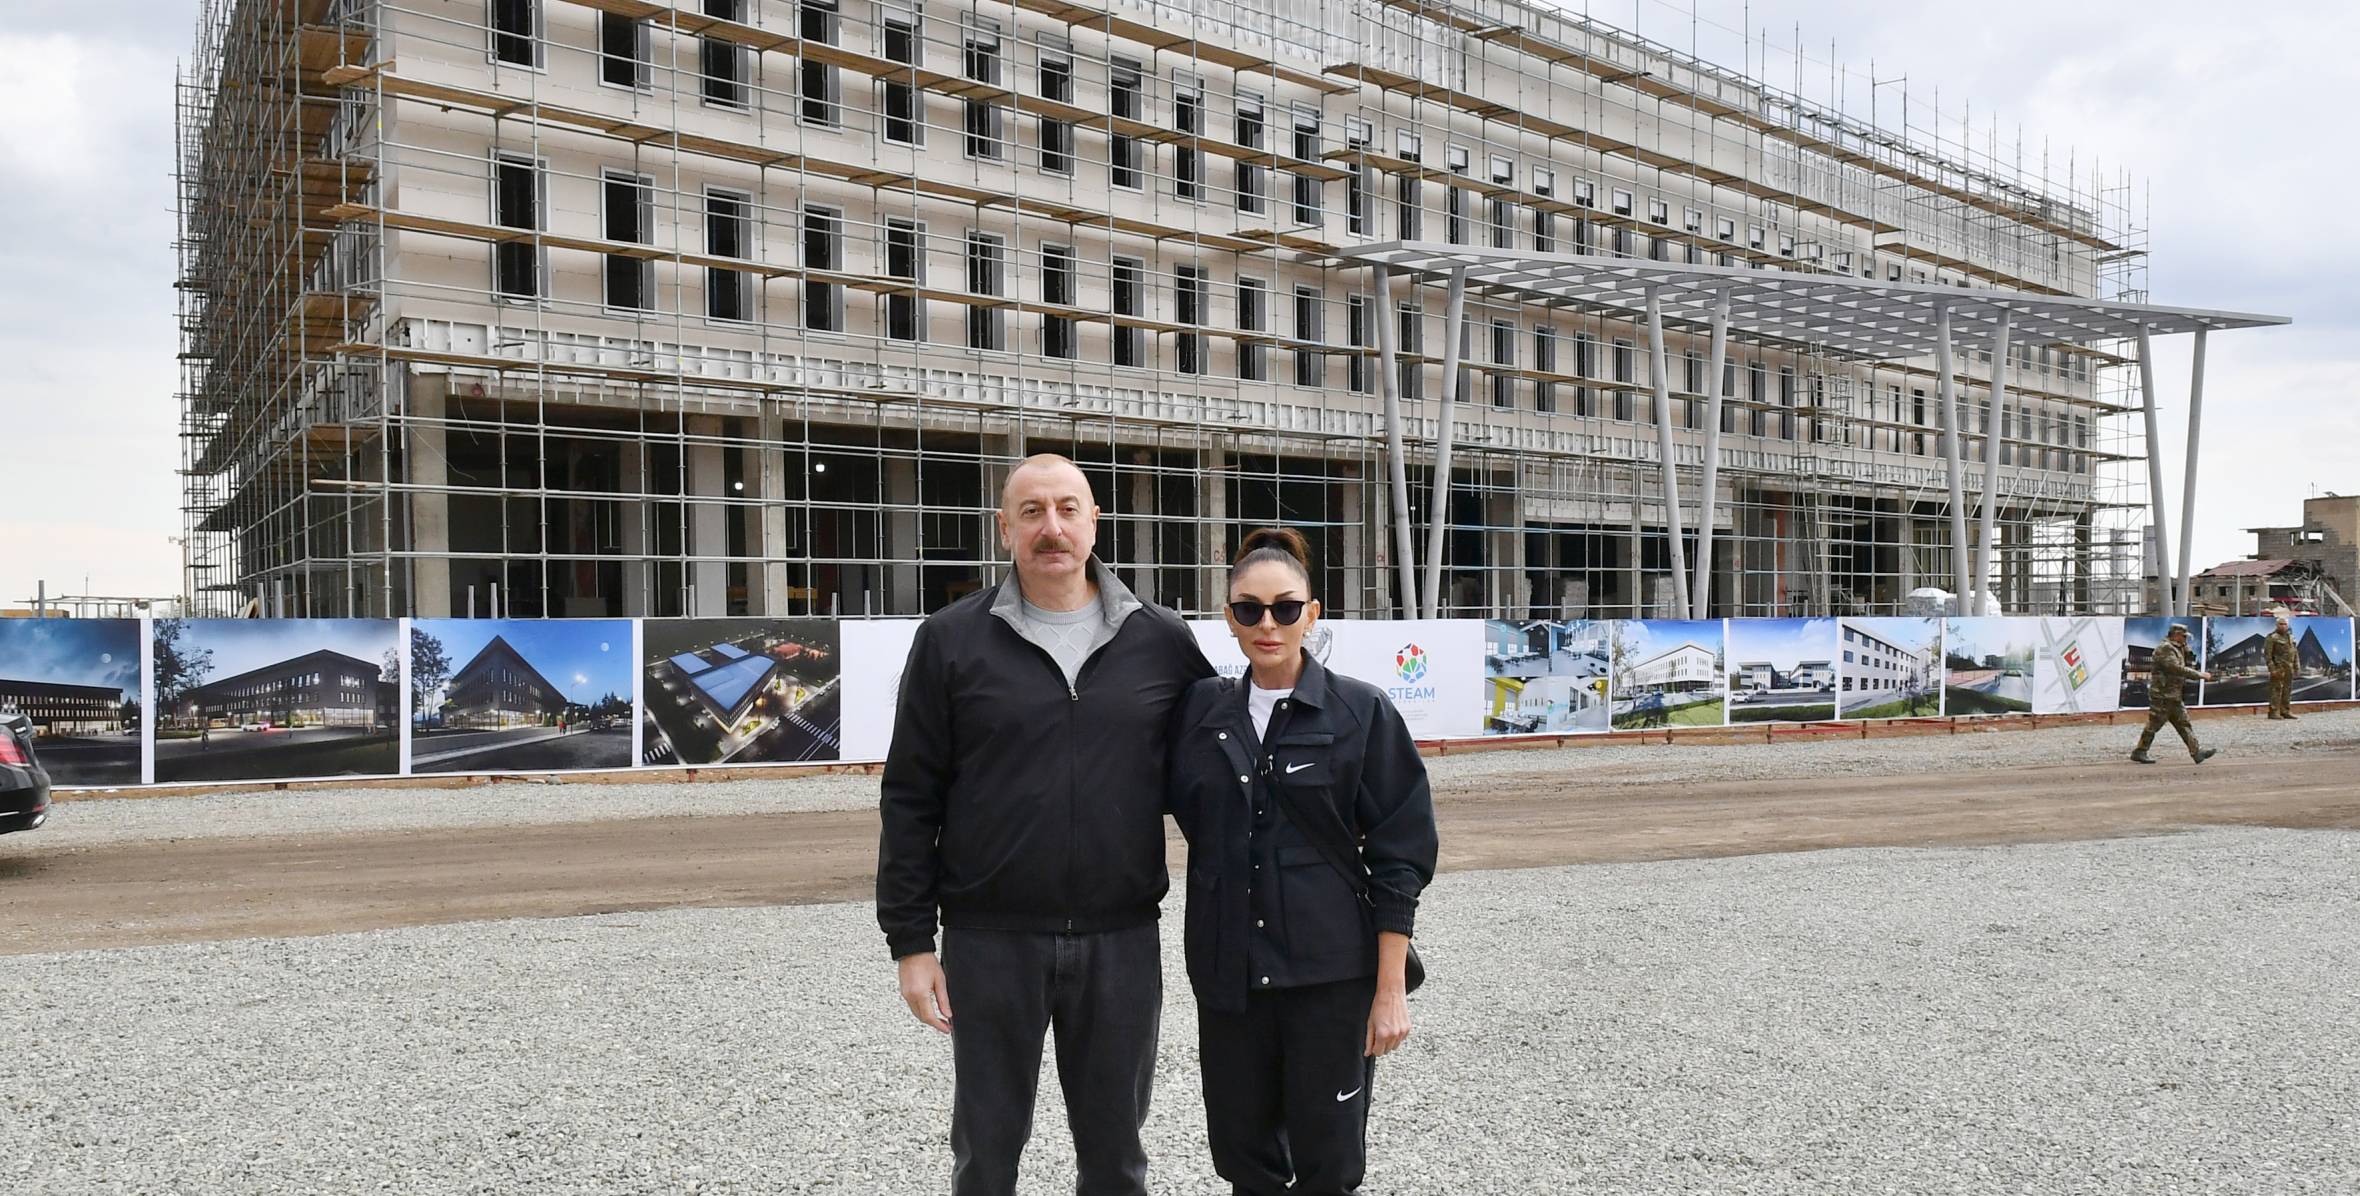 Ilham Aliyev and First Lady Mehriban Aliyeva have attended a groundbreaking ceremony for the 3rd residential quarter to be built in the city of Aghdam